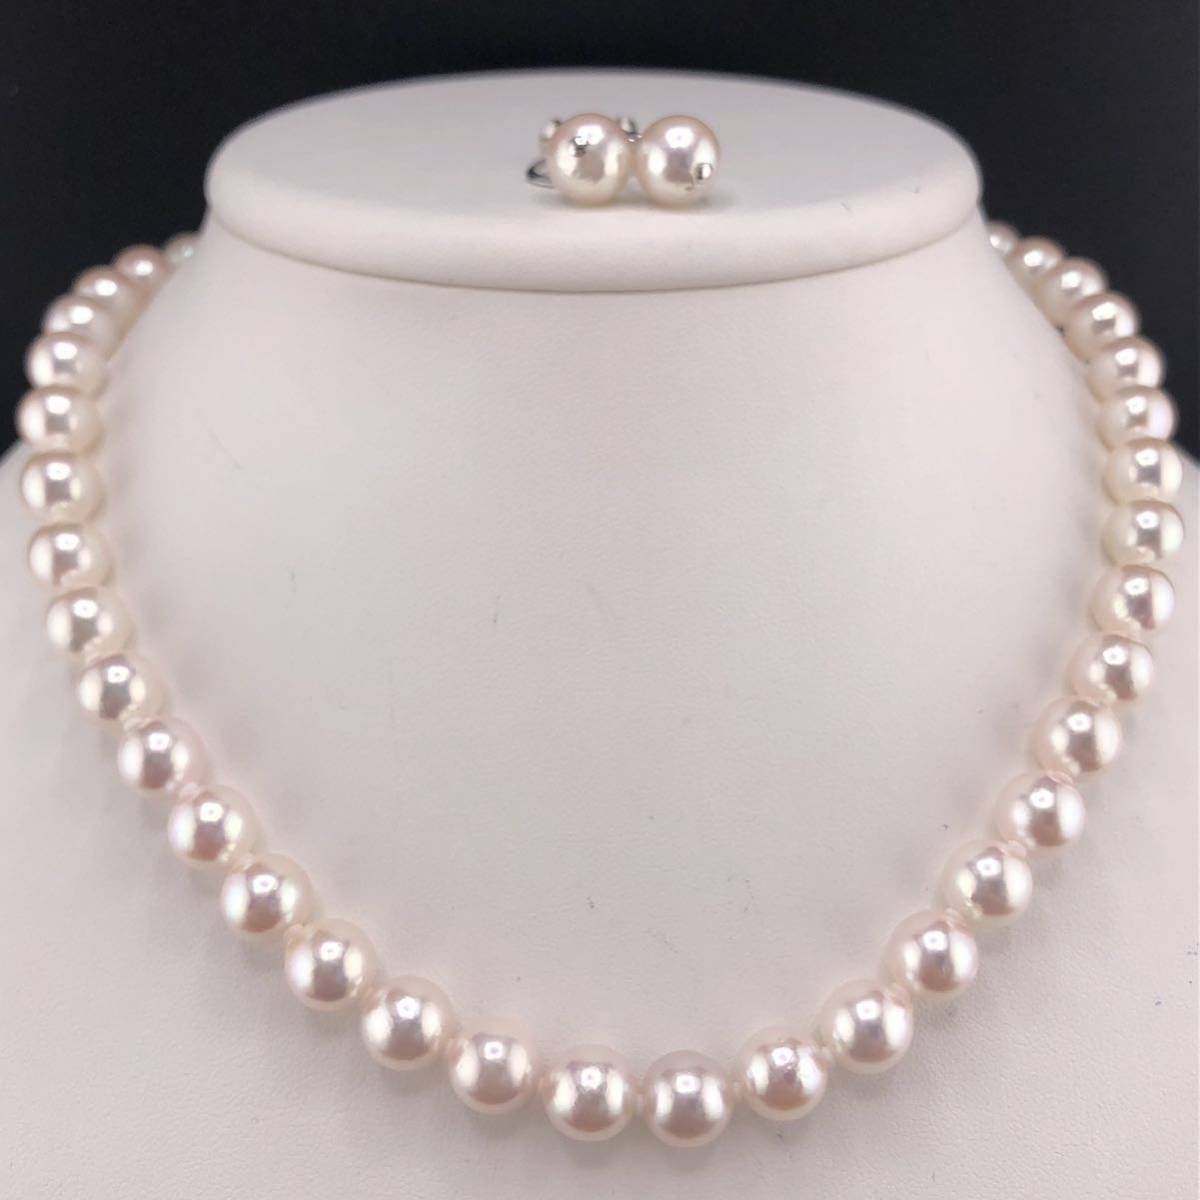 E02-6542 【箱付き☆2点SET】アコヤパールネックレス＆イヤリング 8.5mm~9.0mm 40cm 45g 2.8g ( アコヤ真珠 Pearl necklace SILVER )_画像1